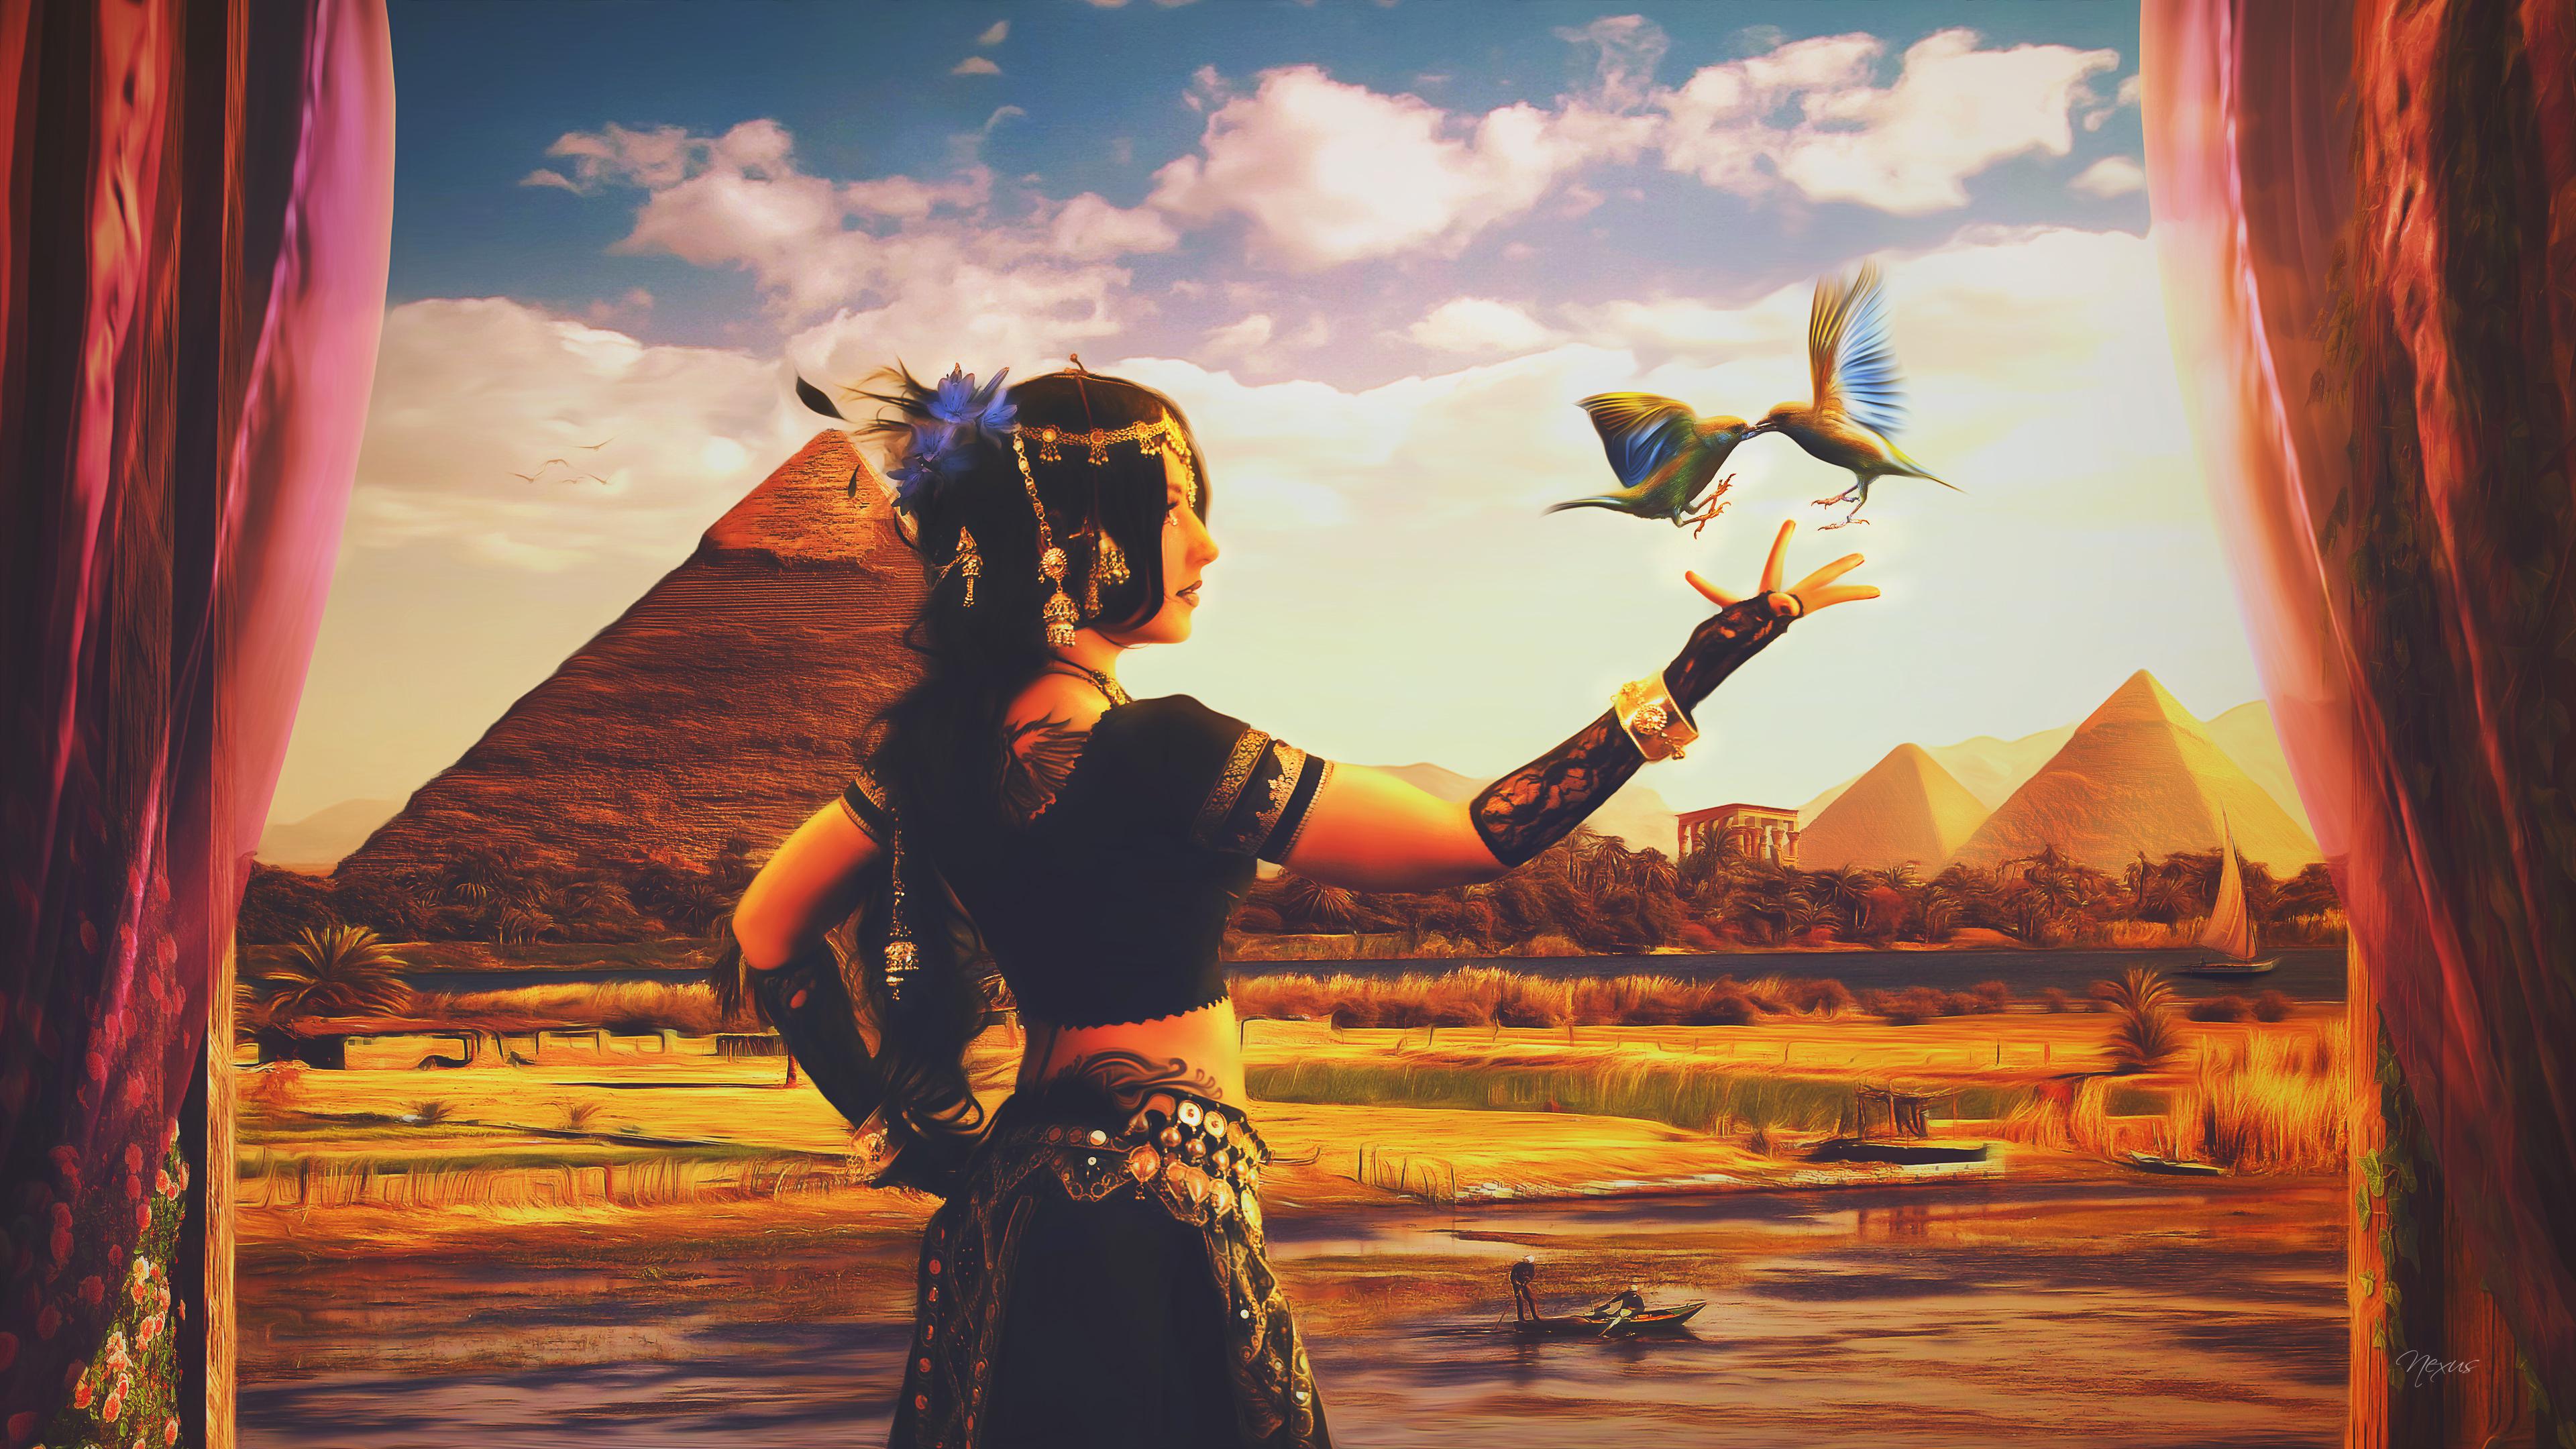 Egypt 4K wallpaper for your desktop or mobile screen free and easy to download